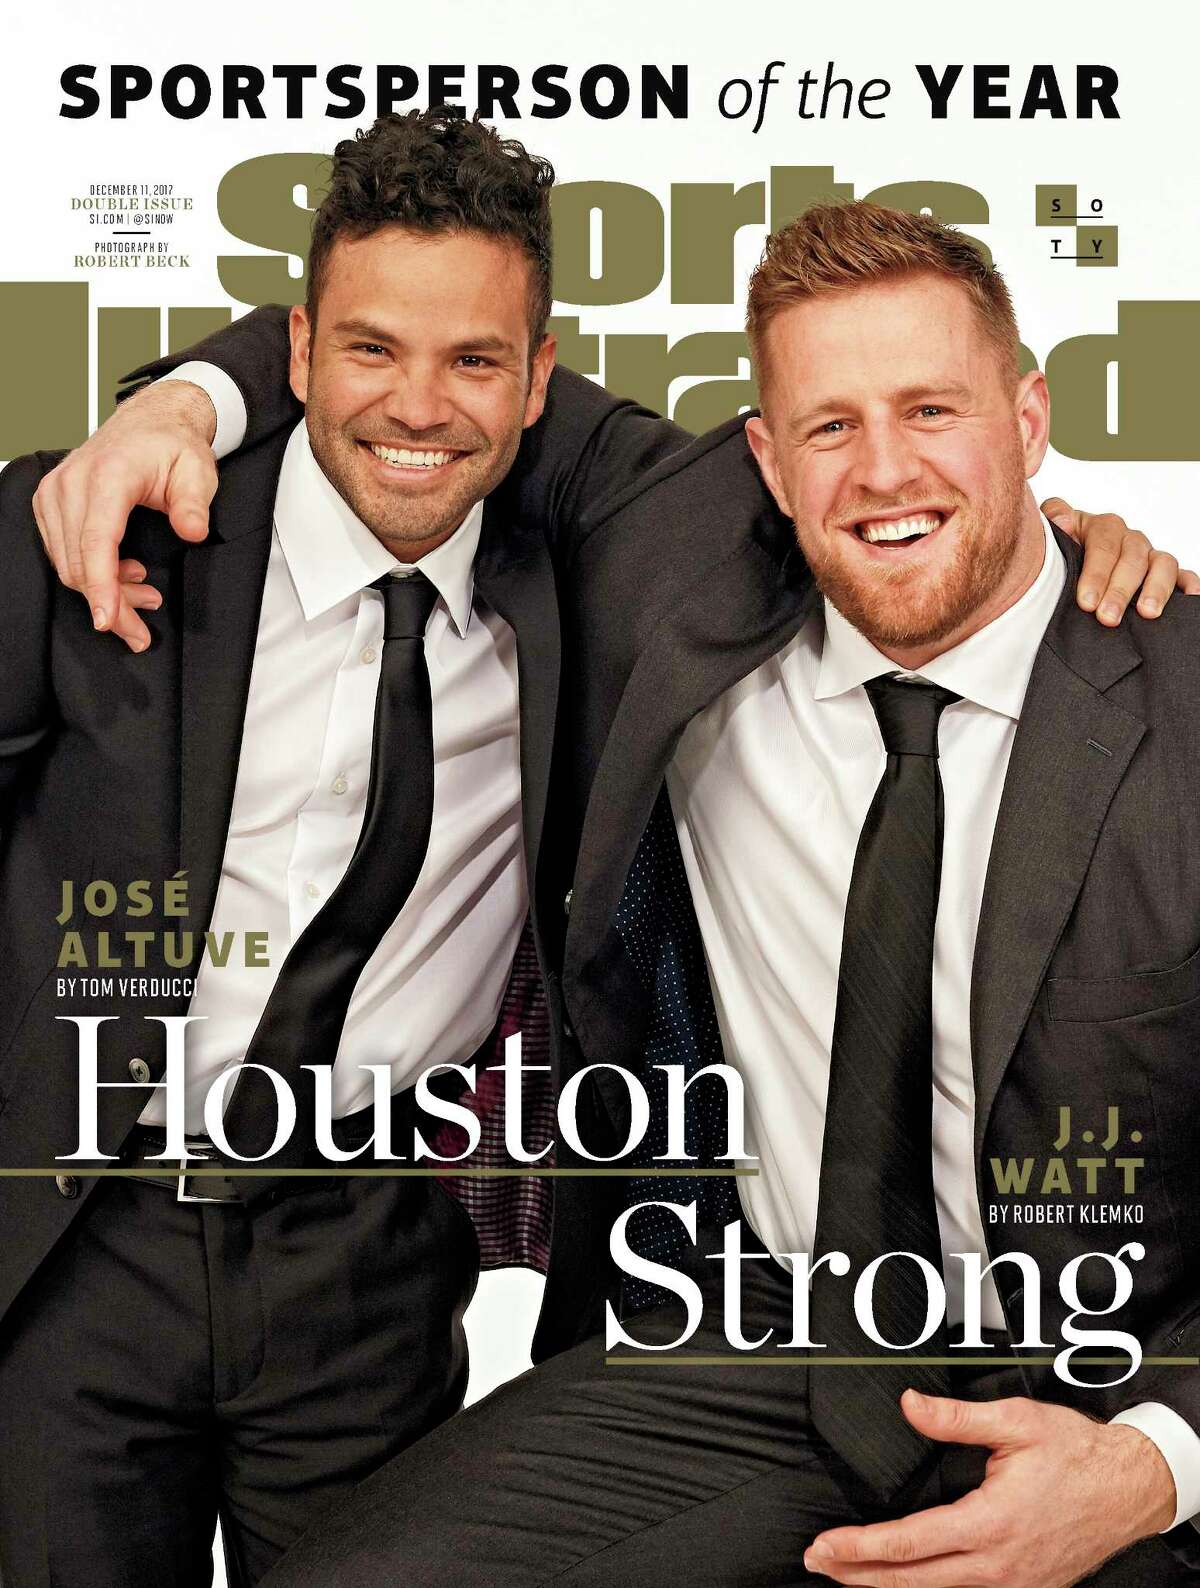 2017 Sports Illustrated Sportsperson of the Year  The Houston Astros' Jose Altuve and Houston Texans defensive end J.J. Watt were honored for a combination of on-field performance and civic contributions in the wake of Hurricane Harvey. 